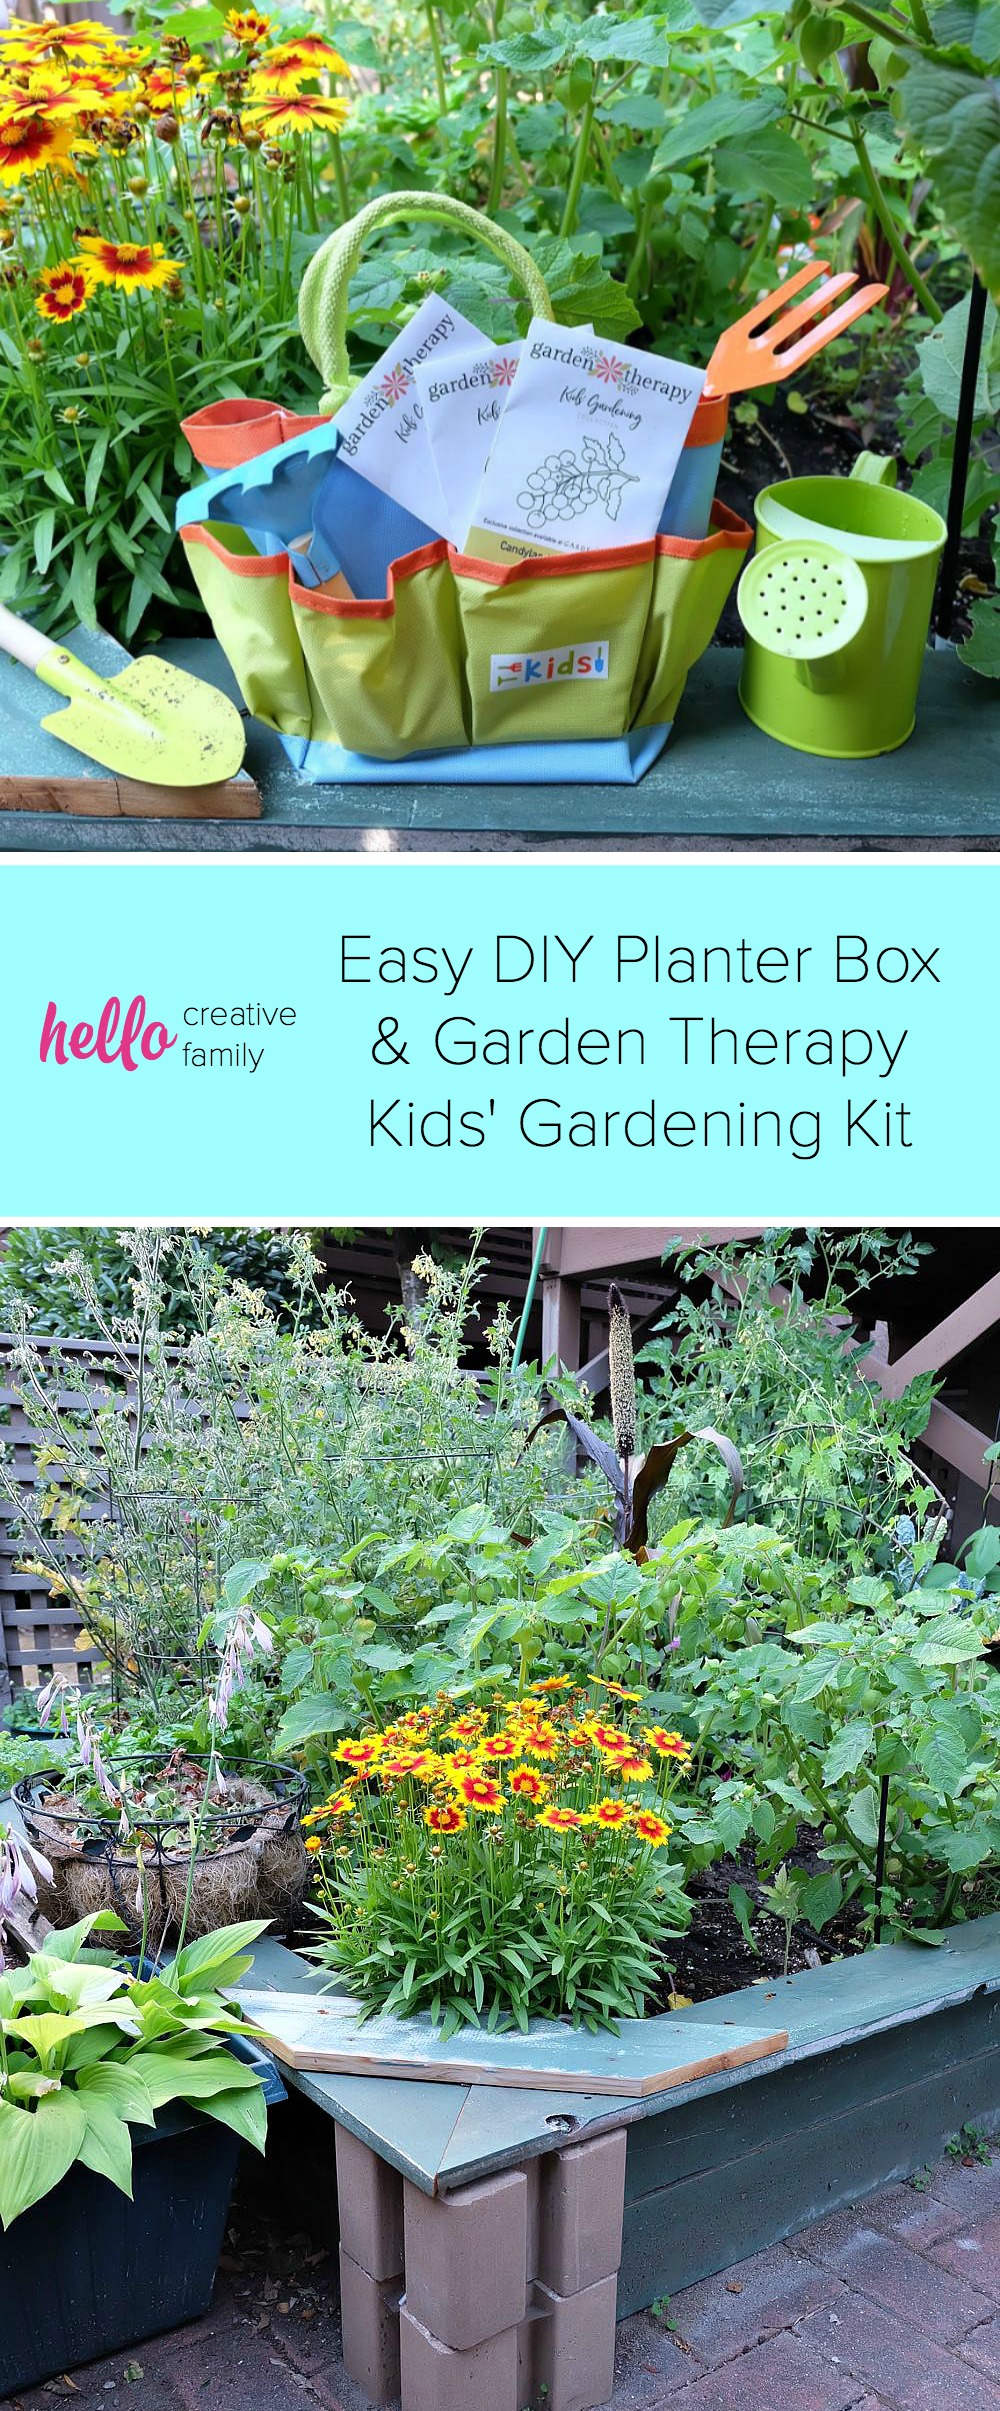 Expand your patio garden or backyard garden with this easy DIY planter box from Hello Creative Family. No power tools required, this planter box can be made in an hour or less in a small space, large space or any size in between. Includes step by step instructions. #Gardening #PatioGardening #SmallSpaceGardening #DIY